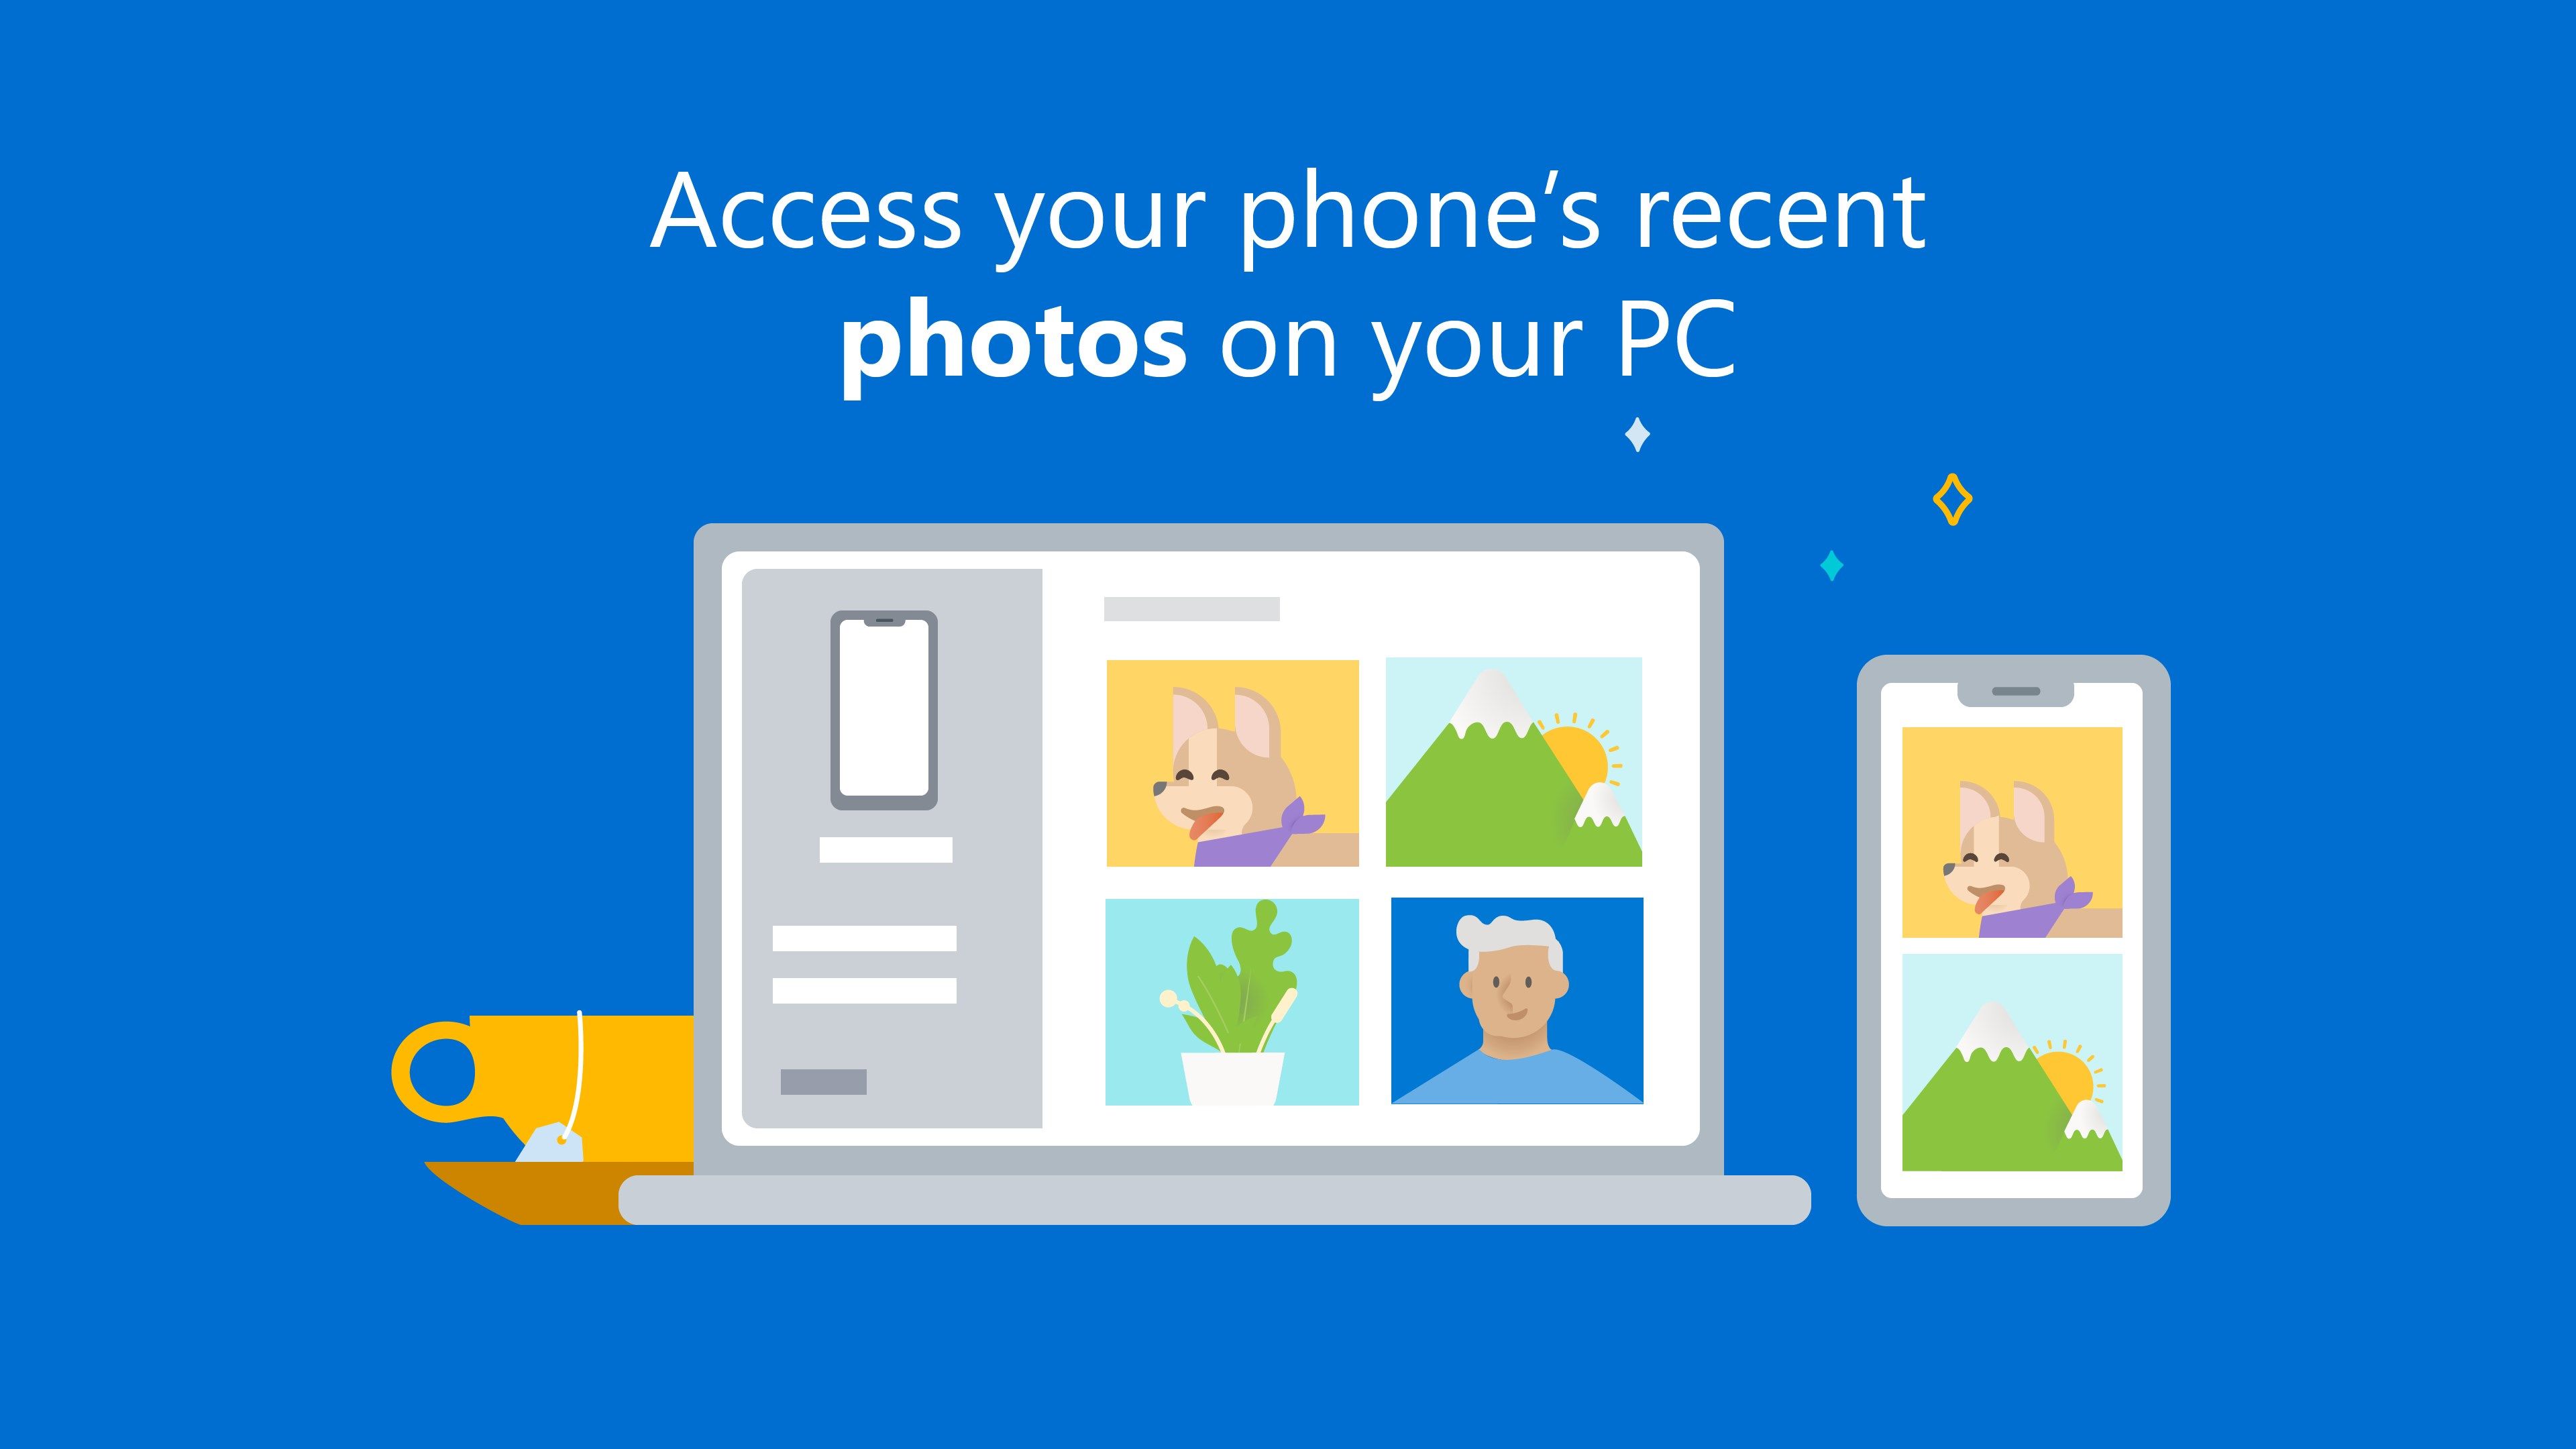 With the Phone Link app, you can instantly access your phone’s most recent photos, right on your PC.​